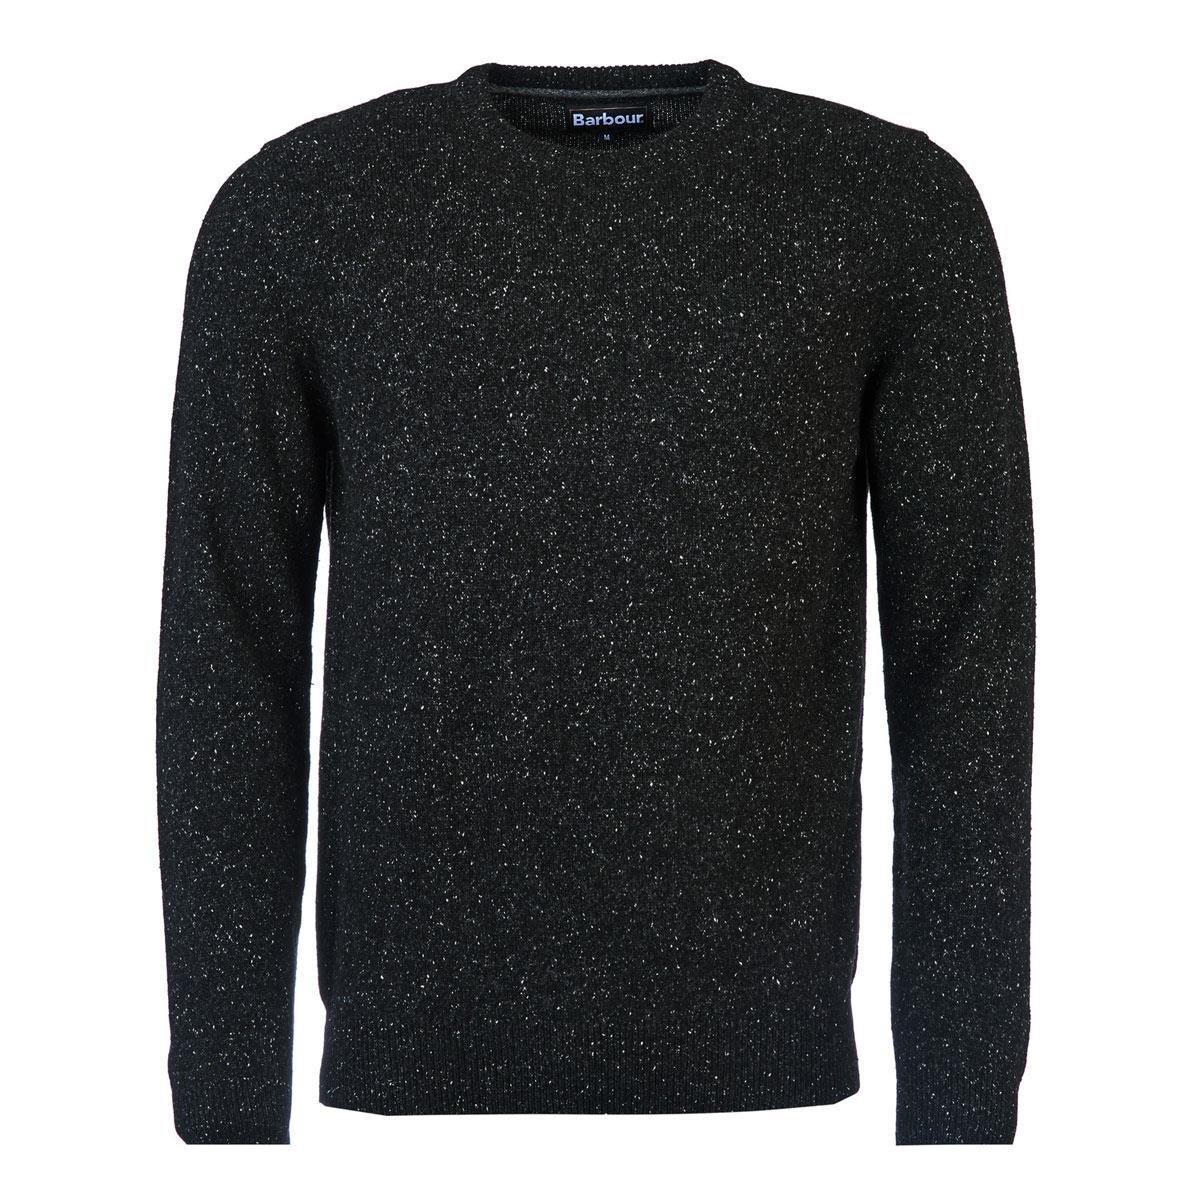 How to properly care for the Barbour Tisbury Crew Neck Sweater?